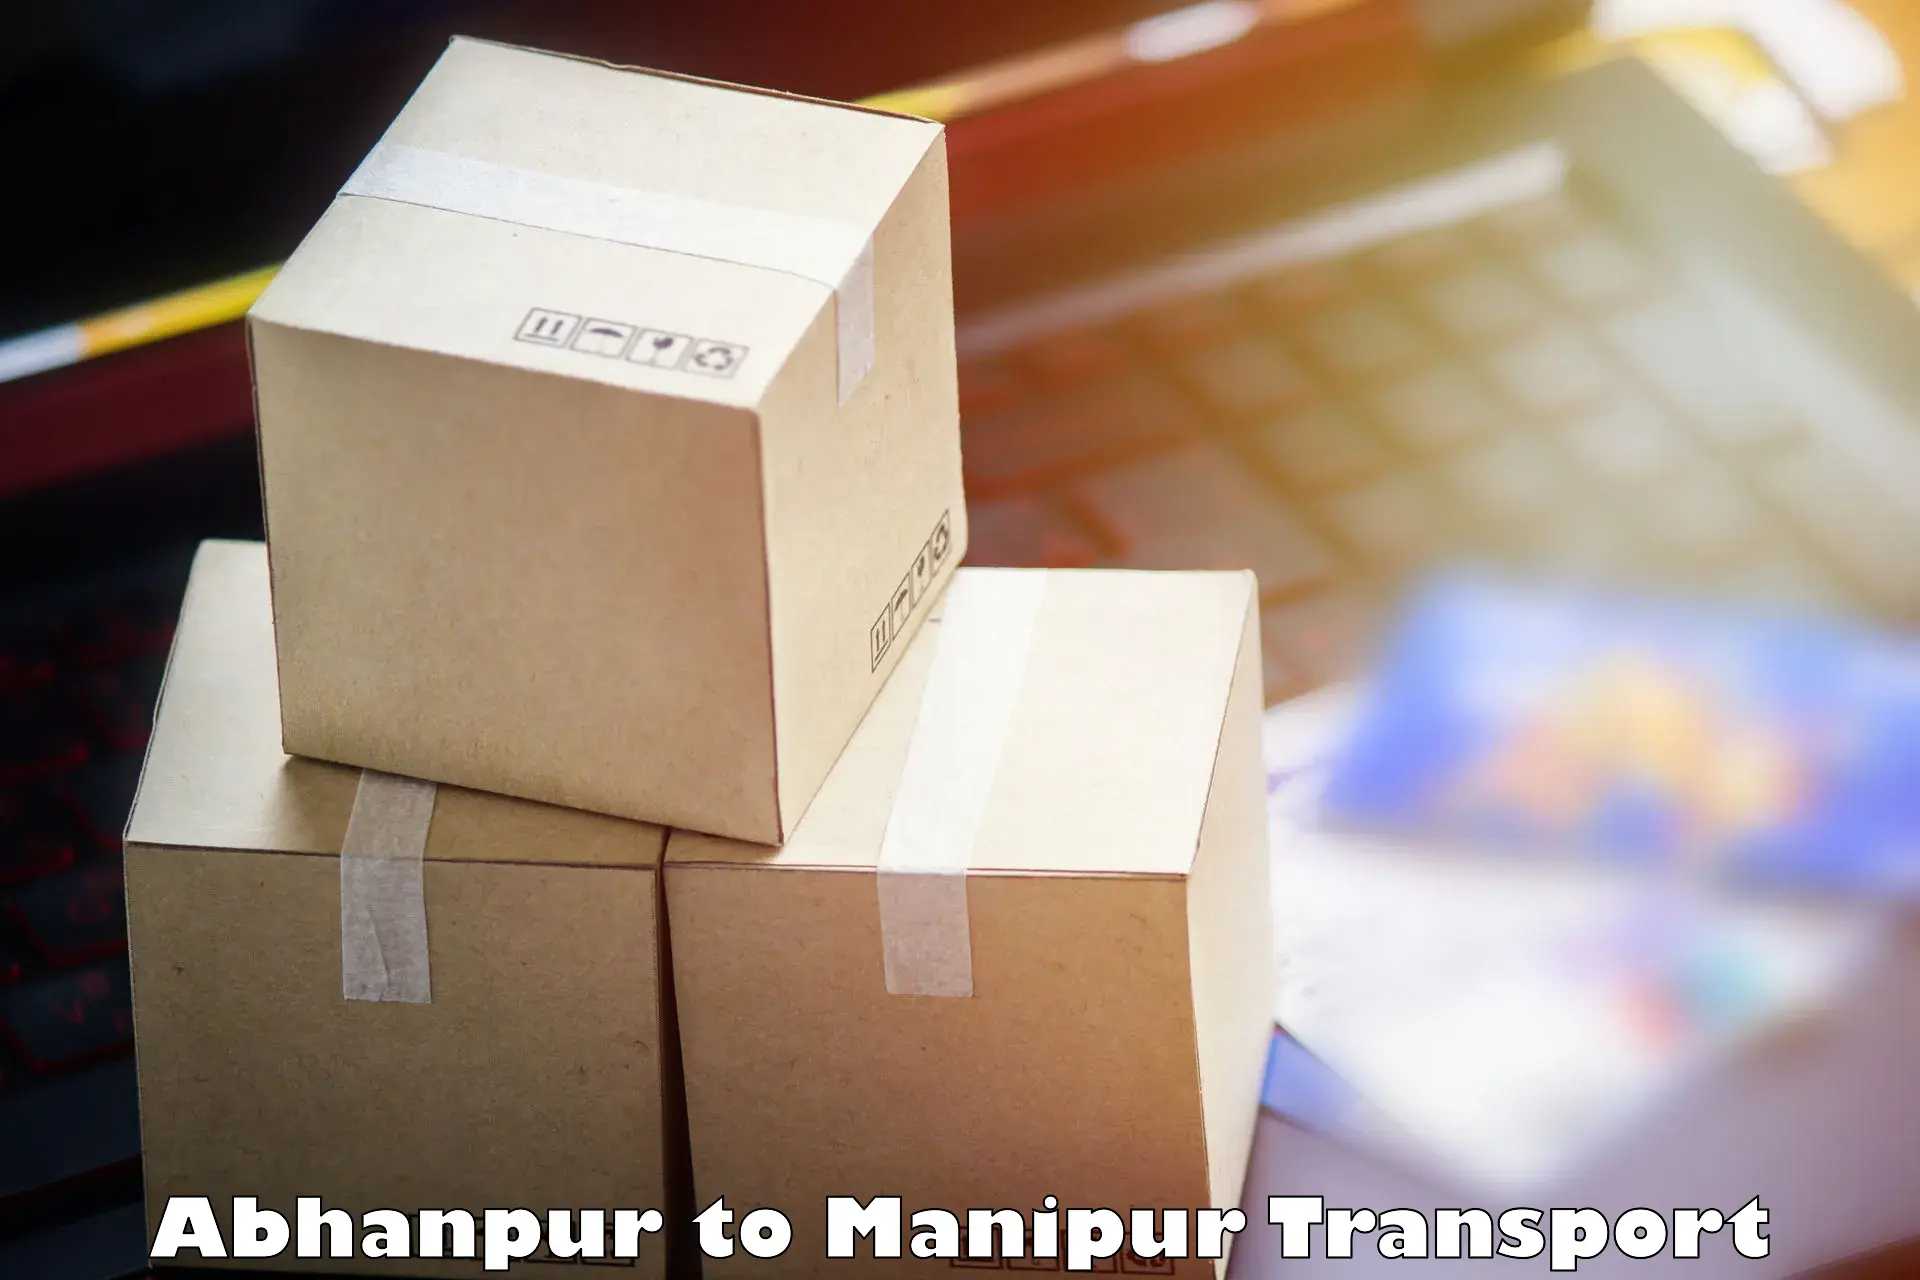 Air freight transport services Abhanpur to Chandel